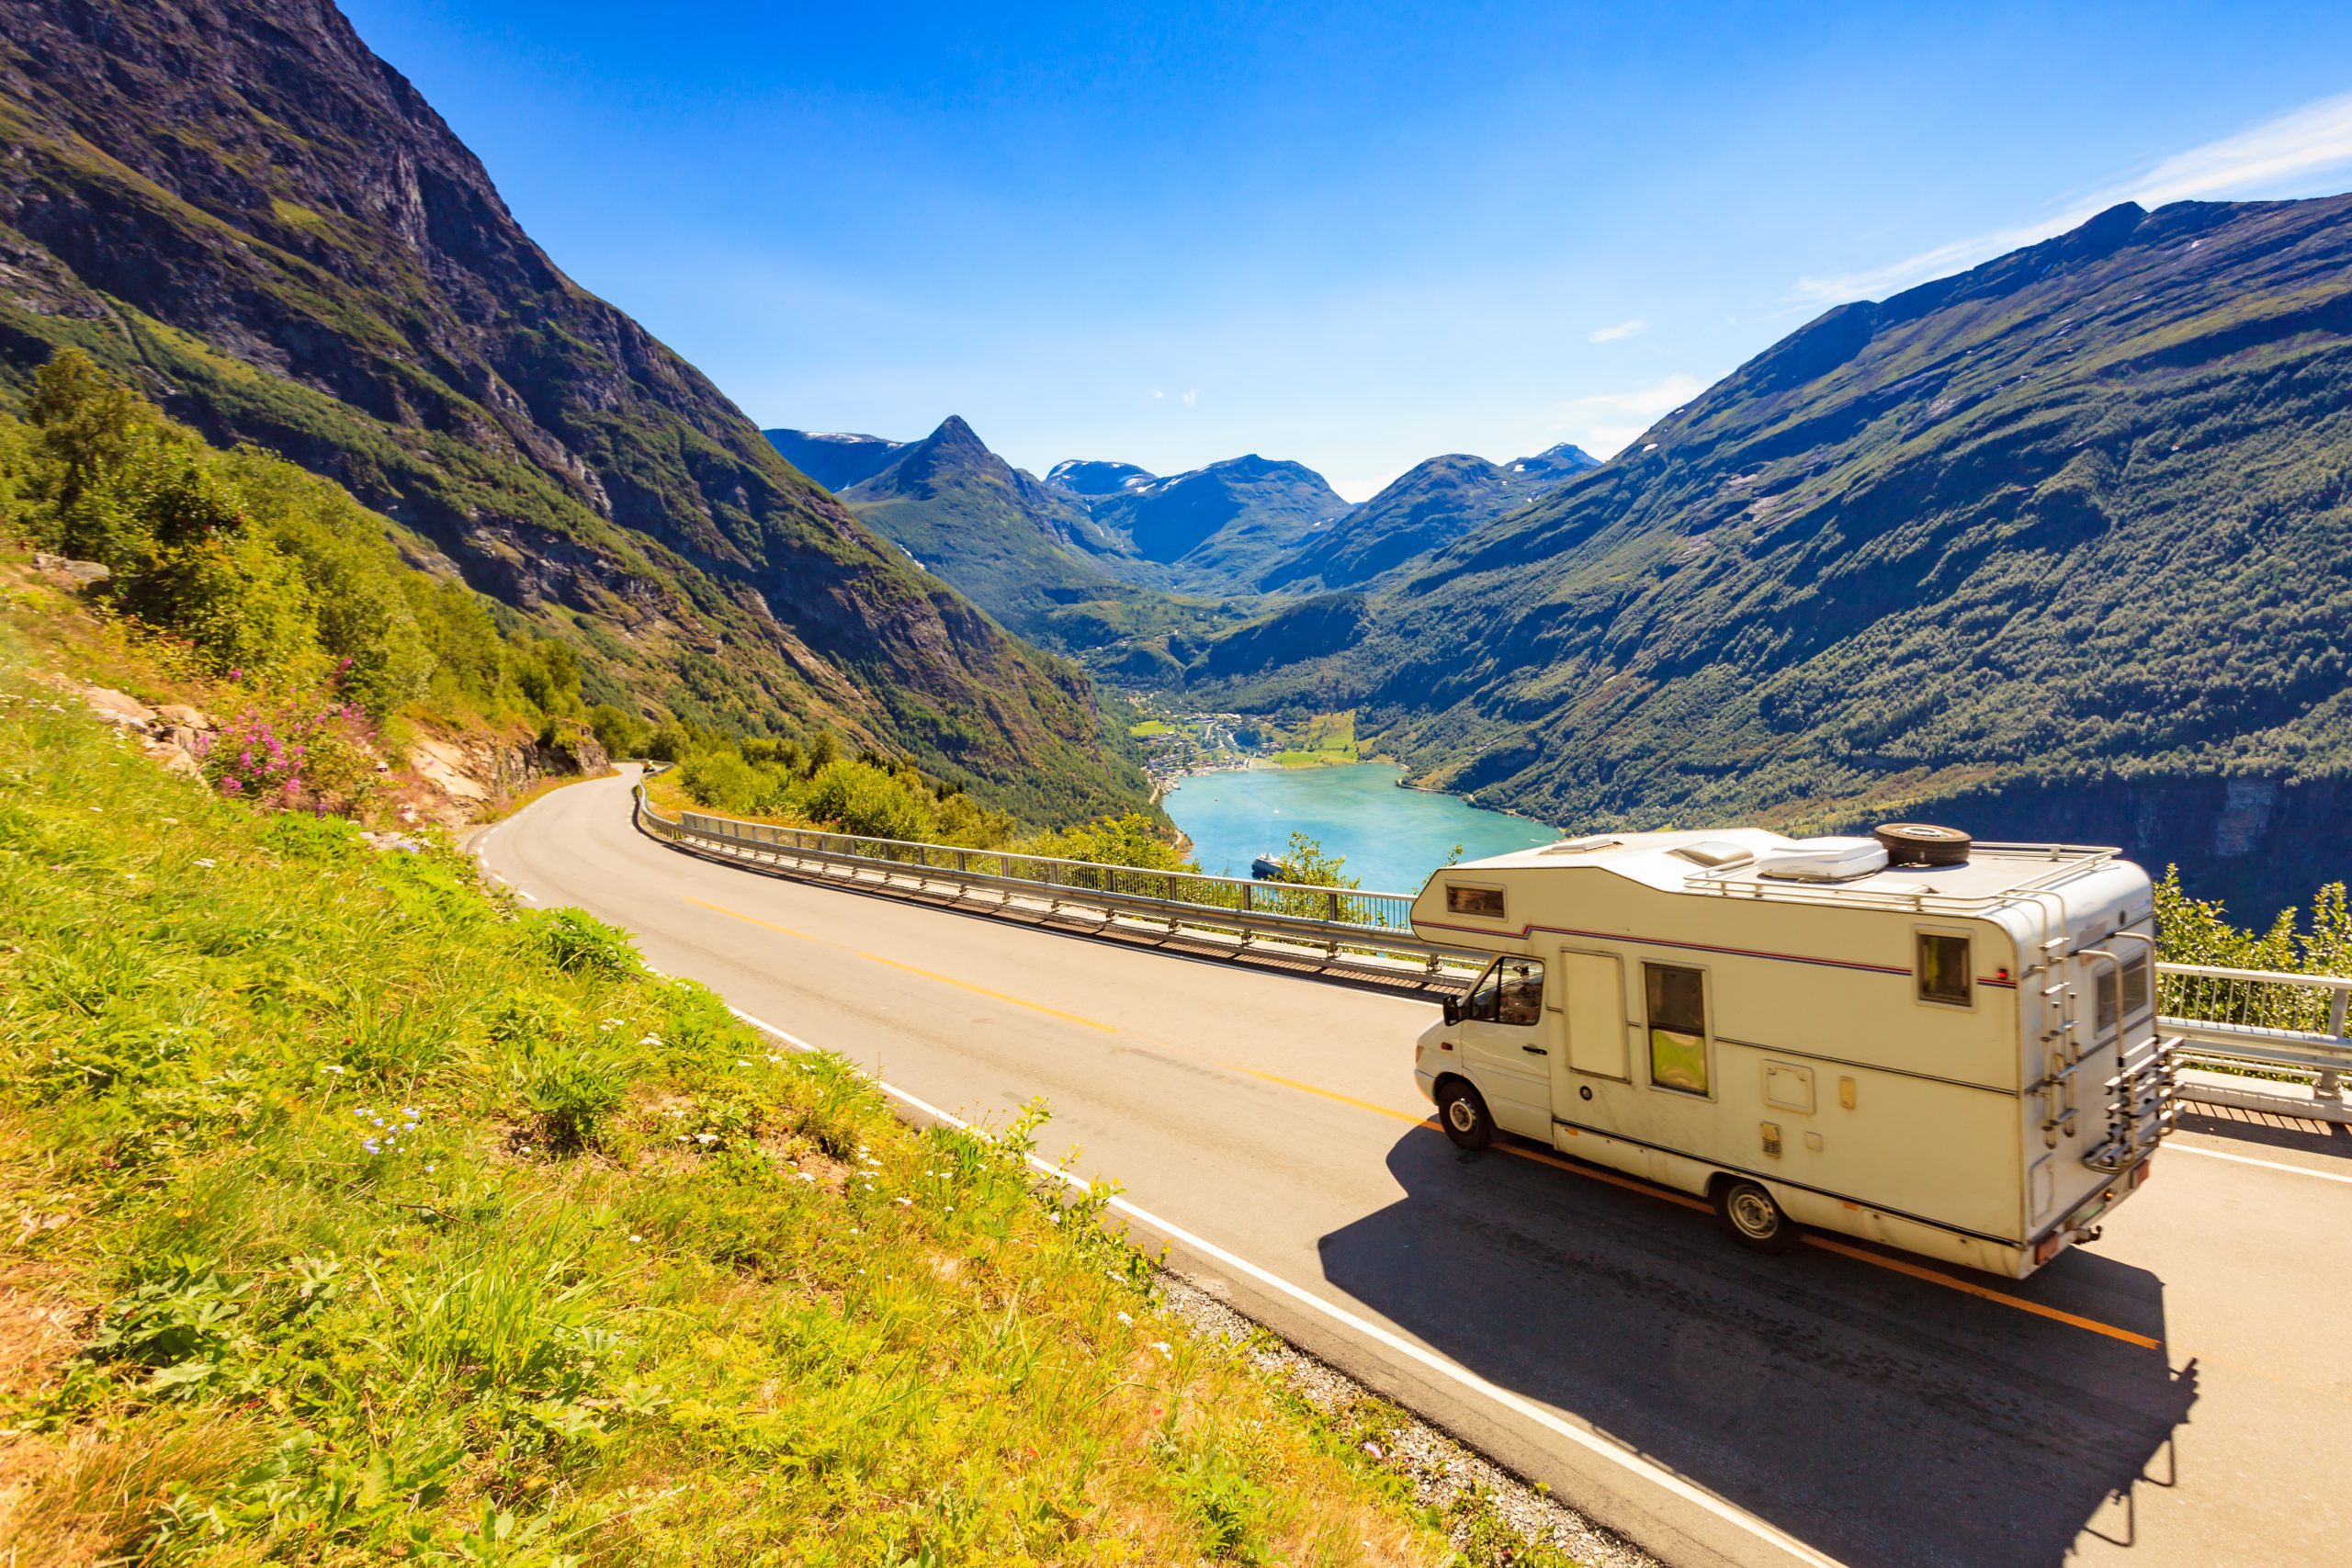 RV Travel Tips: How to Plan an Awesome Road Trip with Your RV